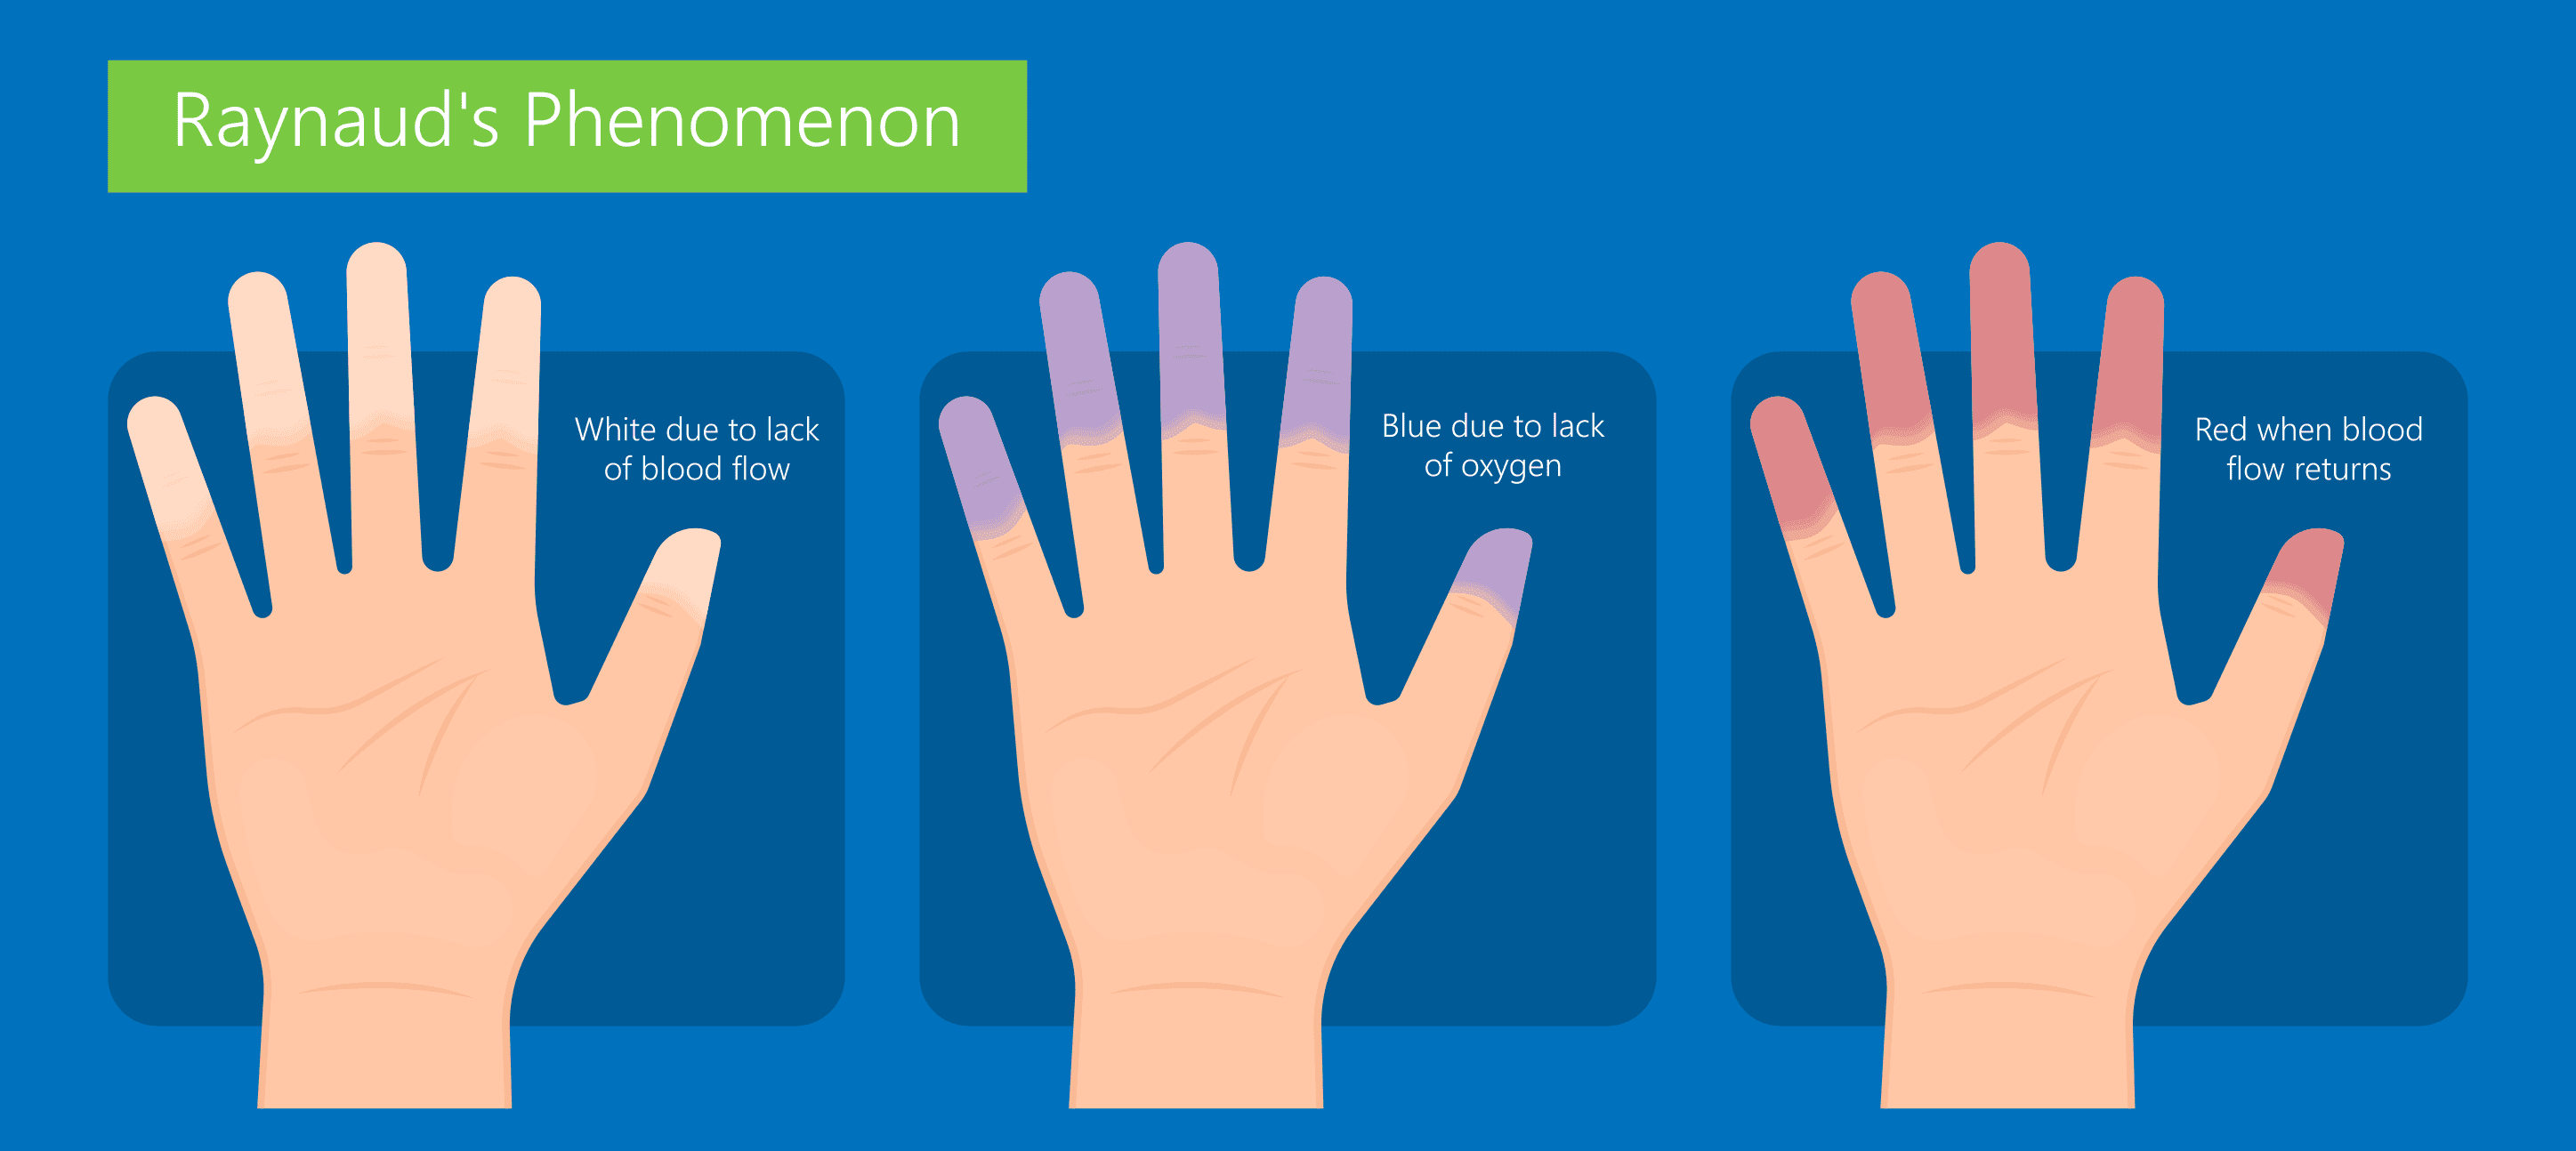 Raynaud&rsquo;s phenomenon - finger color changes